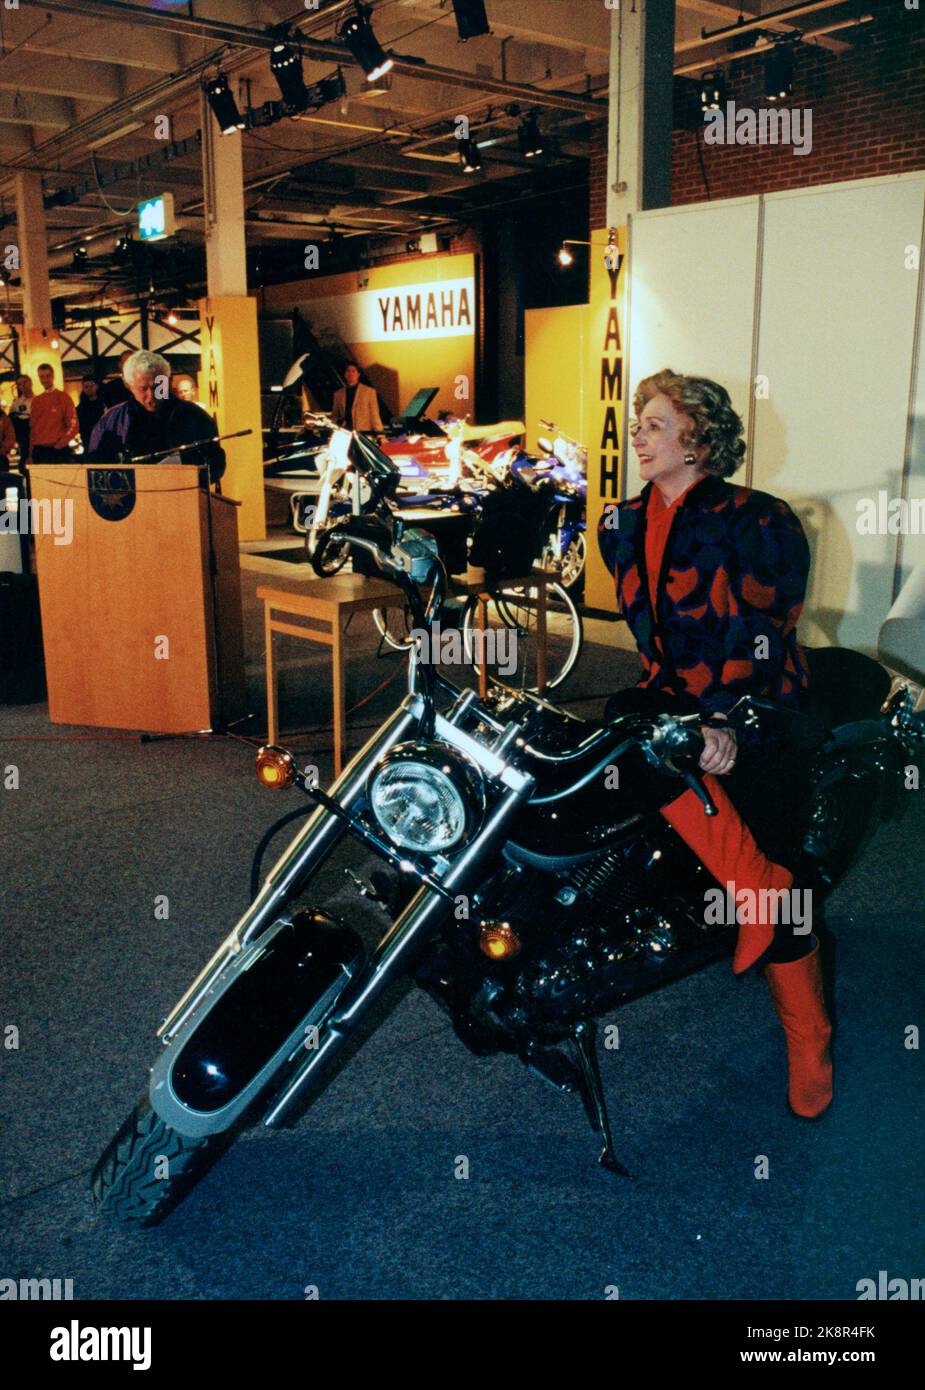 Oslo 19980313. Wenche Foss and Thoralv Maurstad participated in the MC fair 98. He runs his Yamaha 750 Virago on his way to the National Theater every day. She is a motorcycle ridge at the fair. Photo: Knut Falch / Scanfoto / NTB Stock Photo